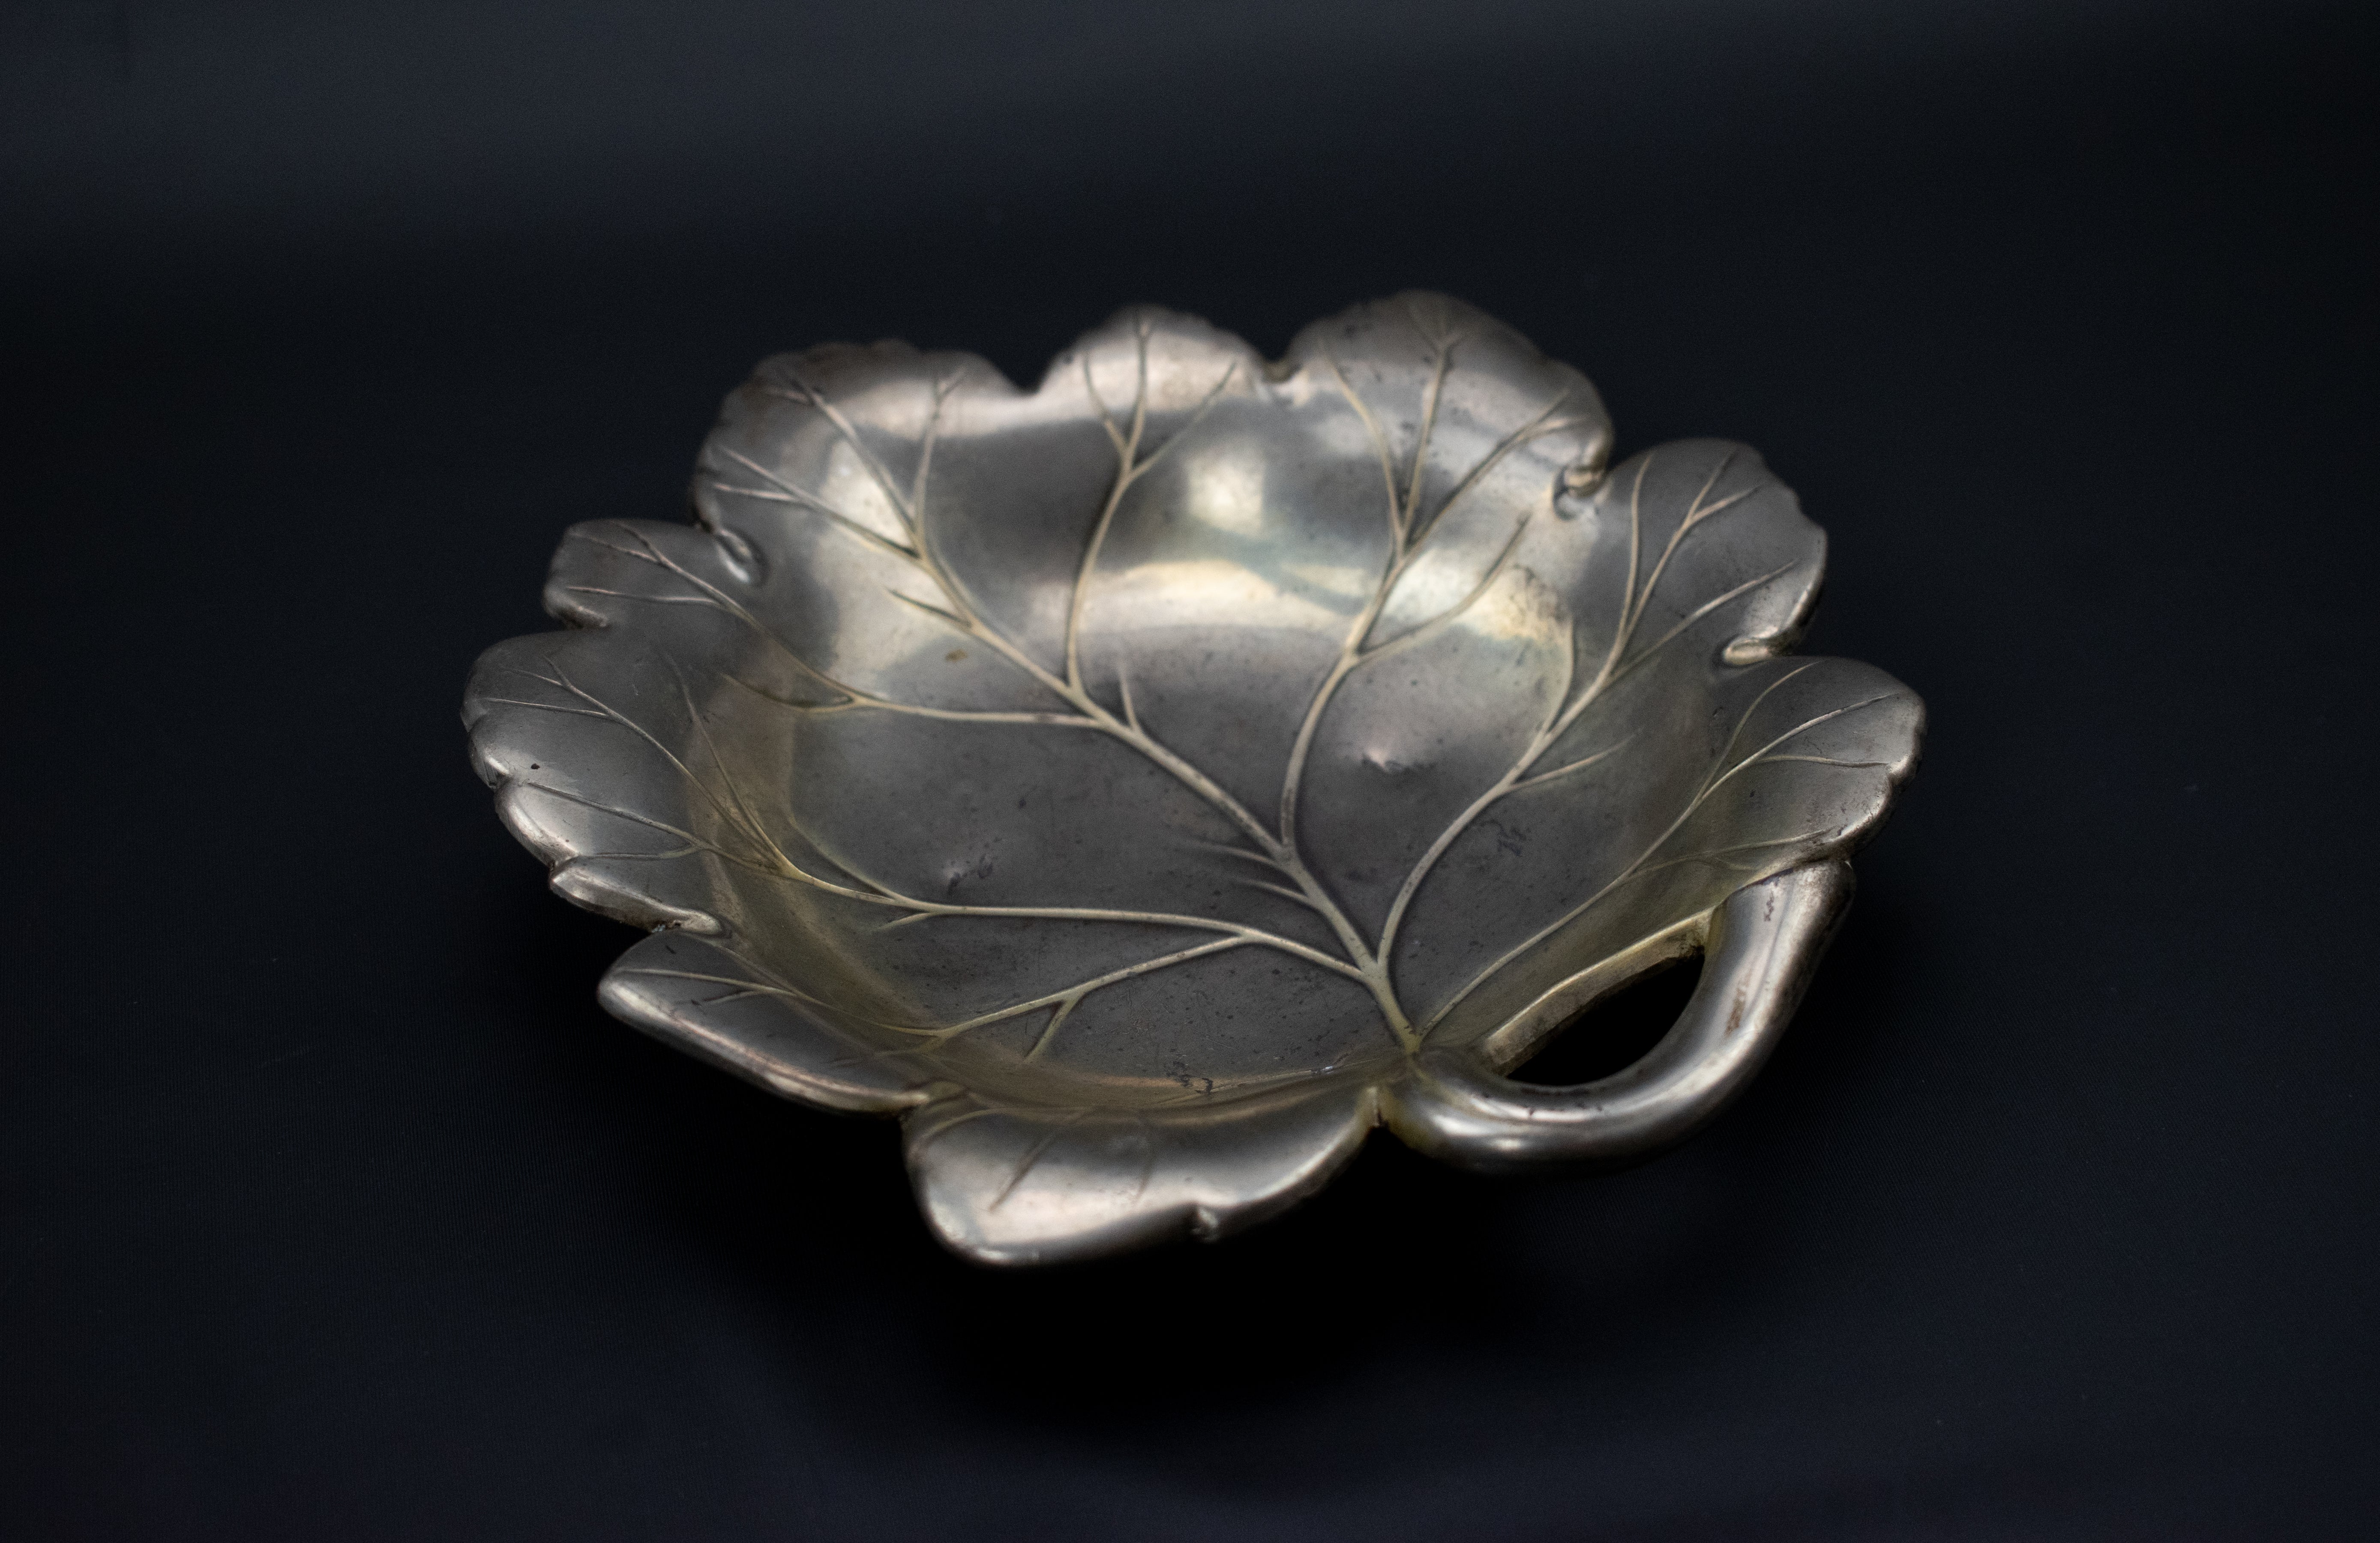 Ashtray Vintage Leaf 5 inch Silver Used Made in Japan Metal Decorative Ashtray Used